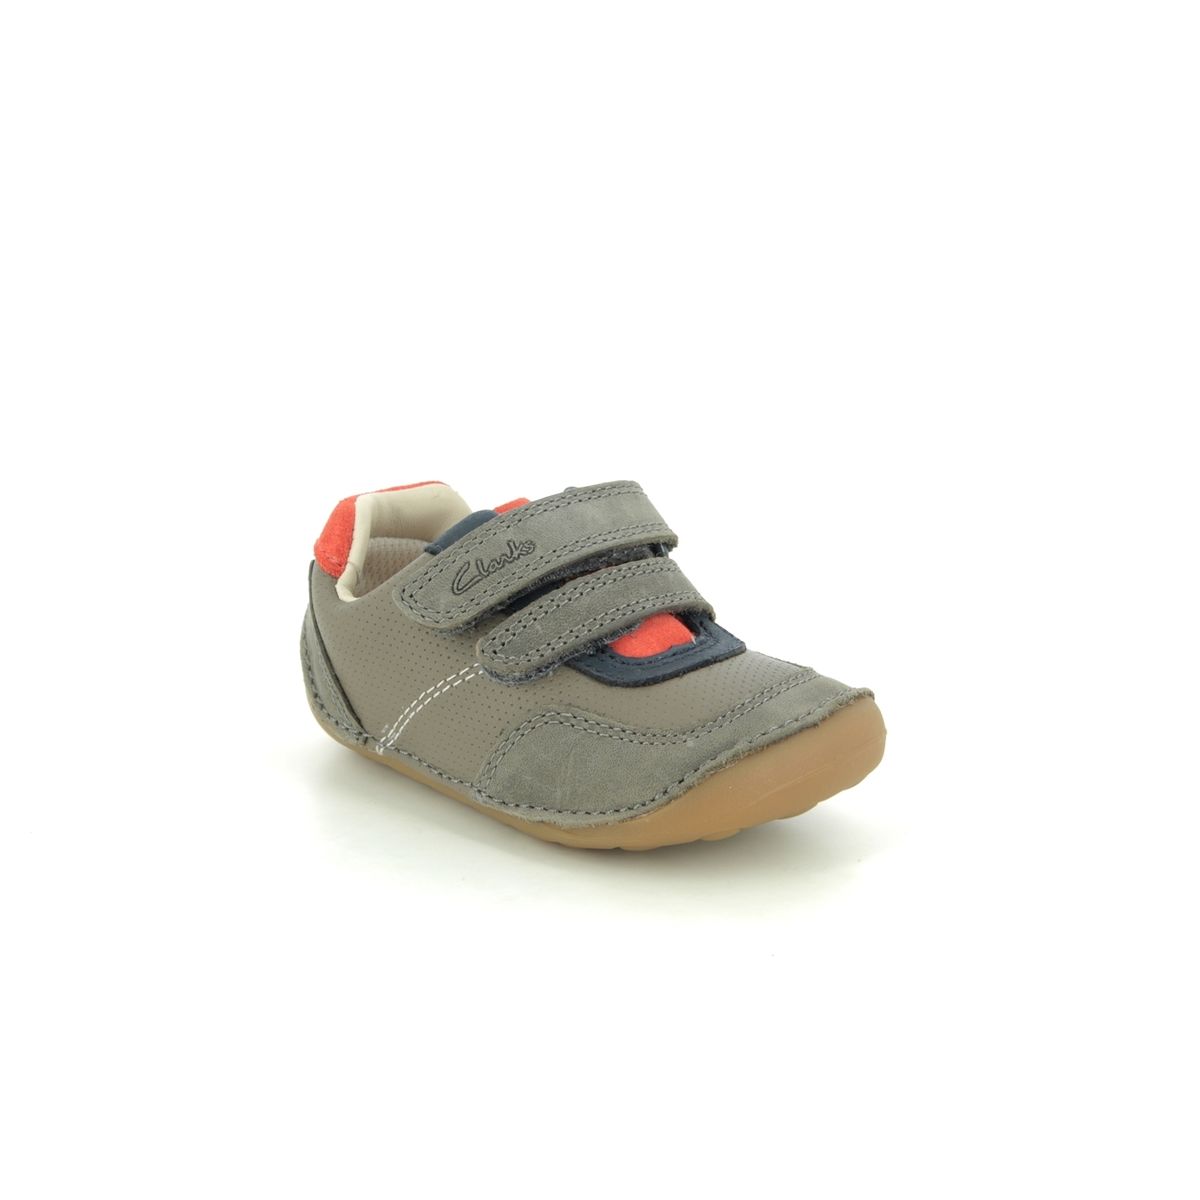 Clarks Tiny Dusk T Dark Grey Leather Kids Boys First Shoes 5472-36F in a Plain Leather in Size 3.5